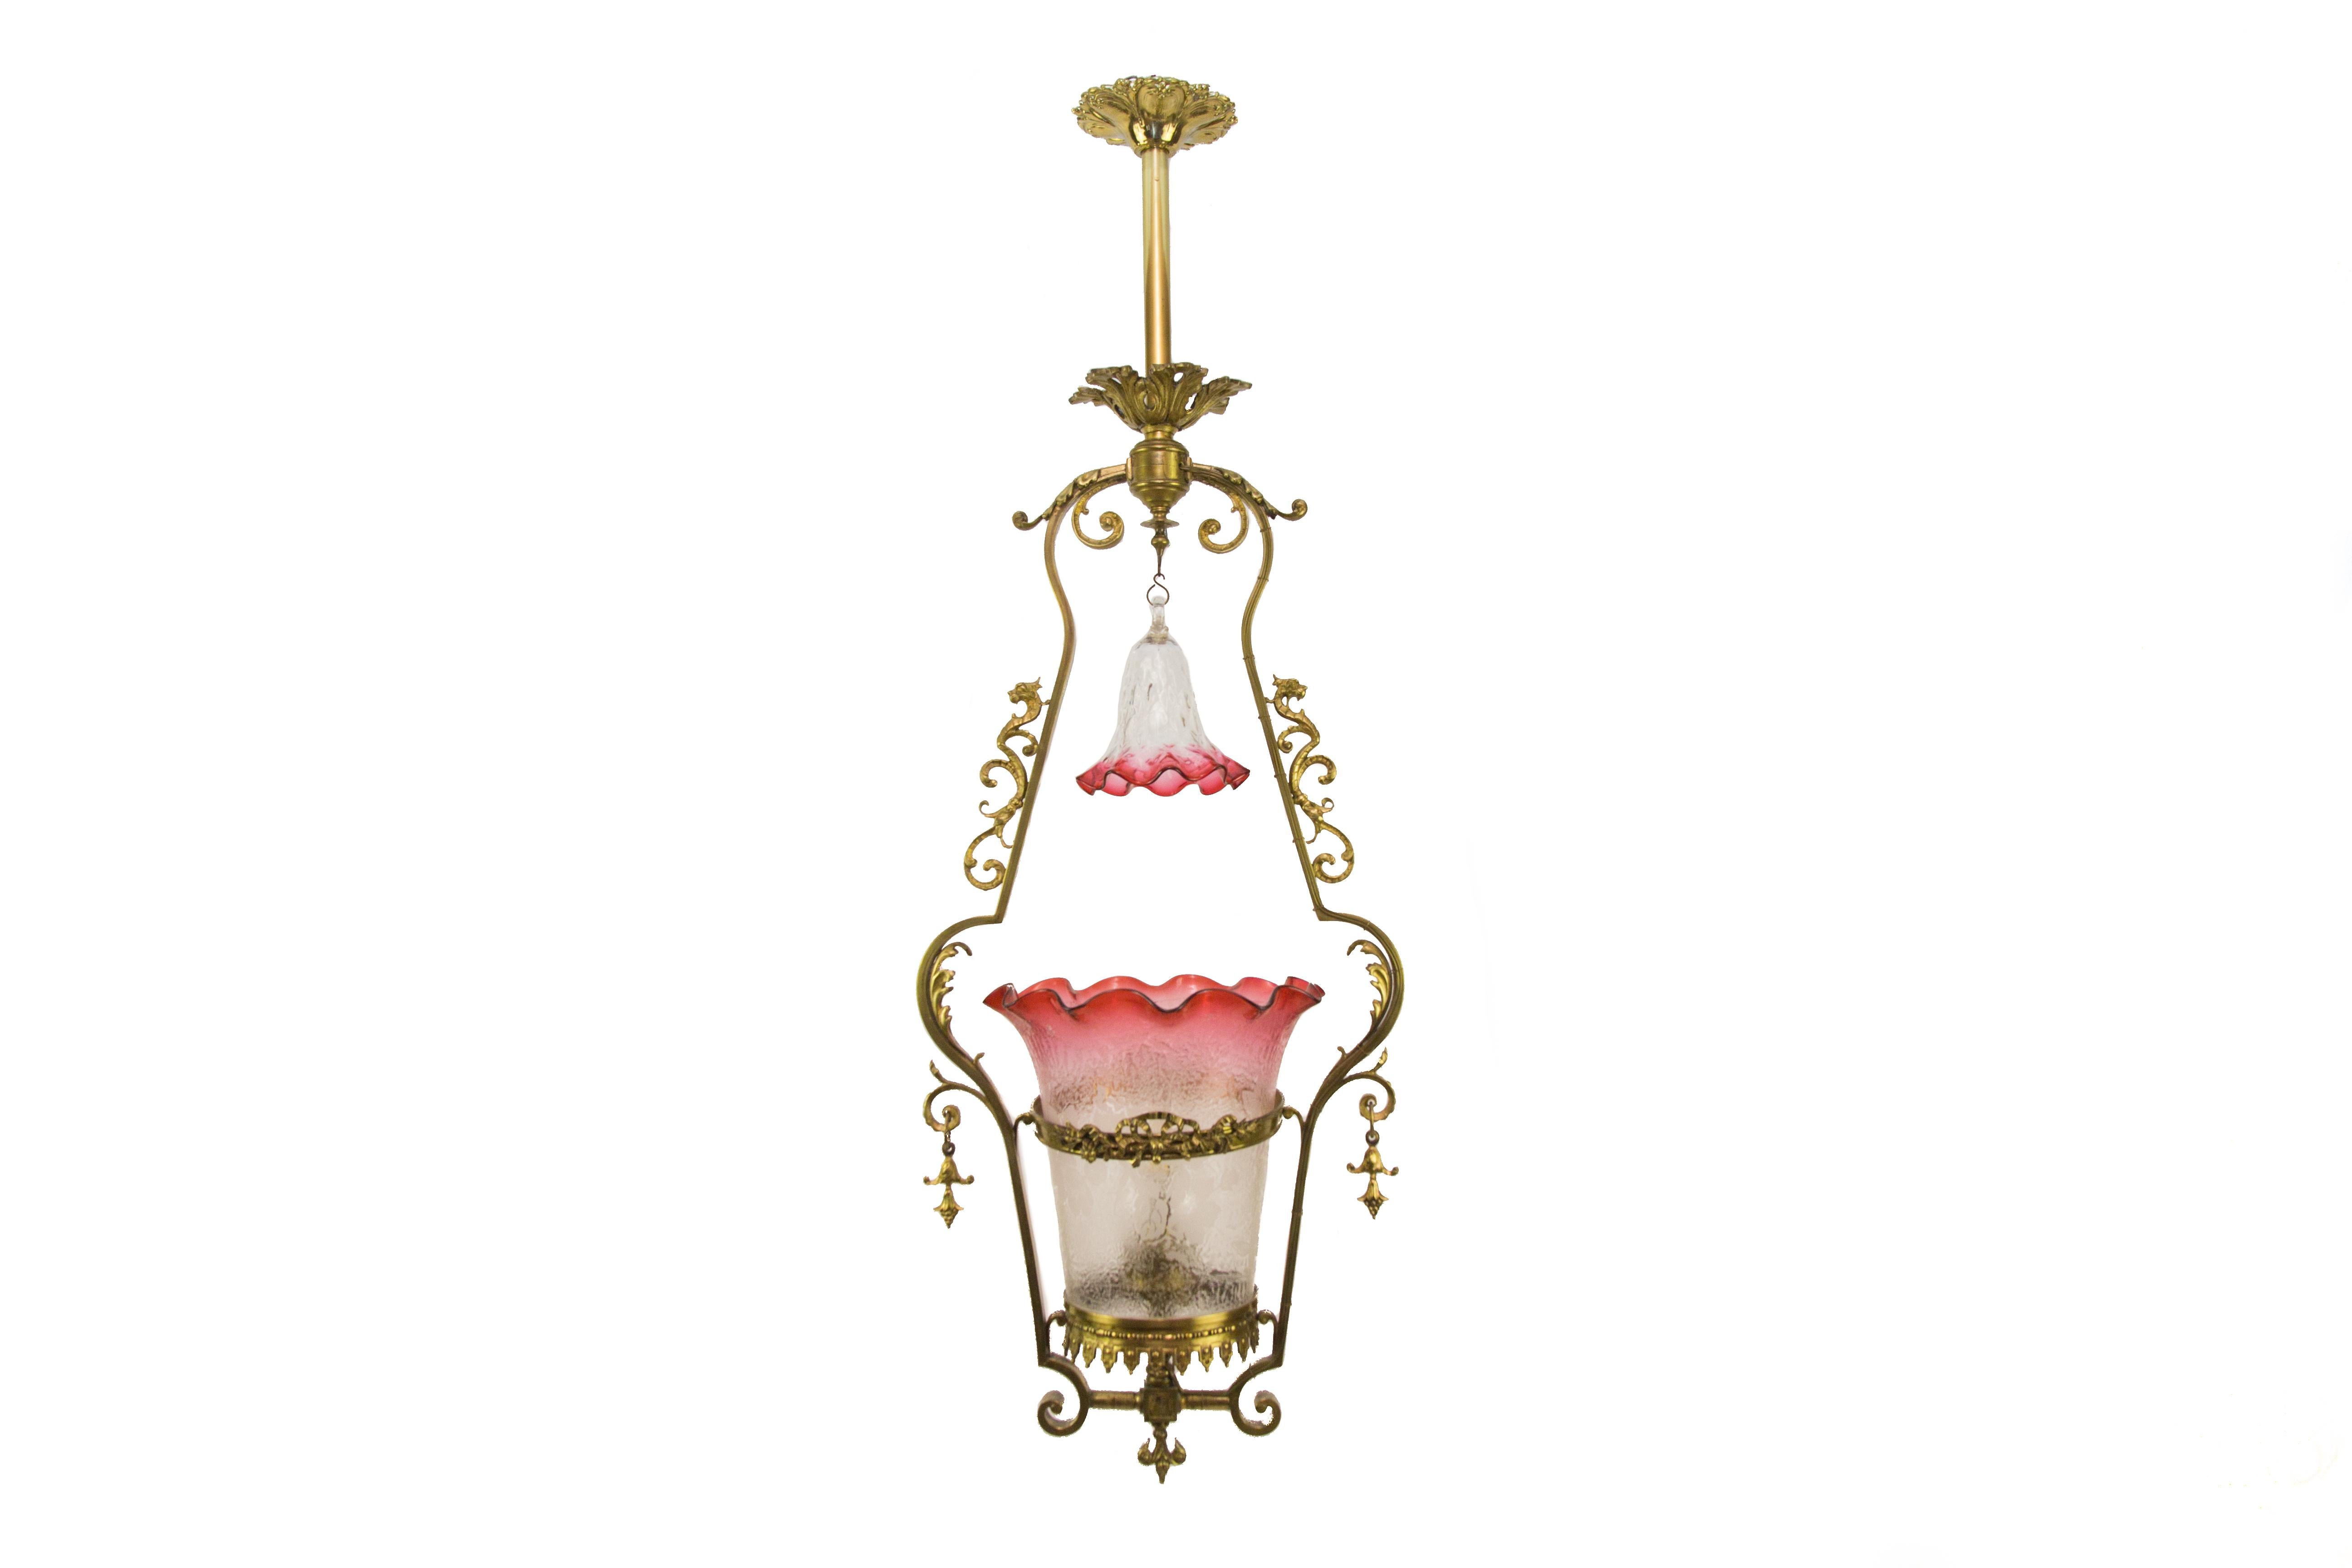 Victorian cranberry glass and bronze pendant hall light.
Victorian electrified gas pendant hall light with etched cranberry glass shade and a gorgeous cranberry glass bell that hangs from the top. The light fixture is from the late 19th Century and